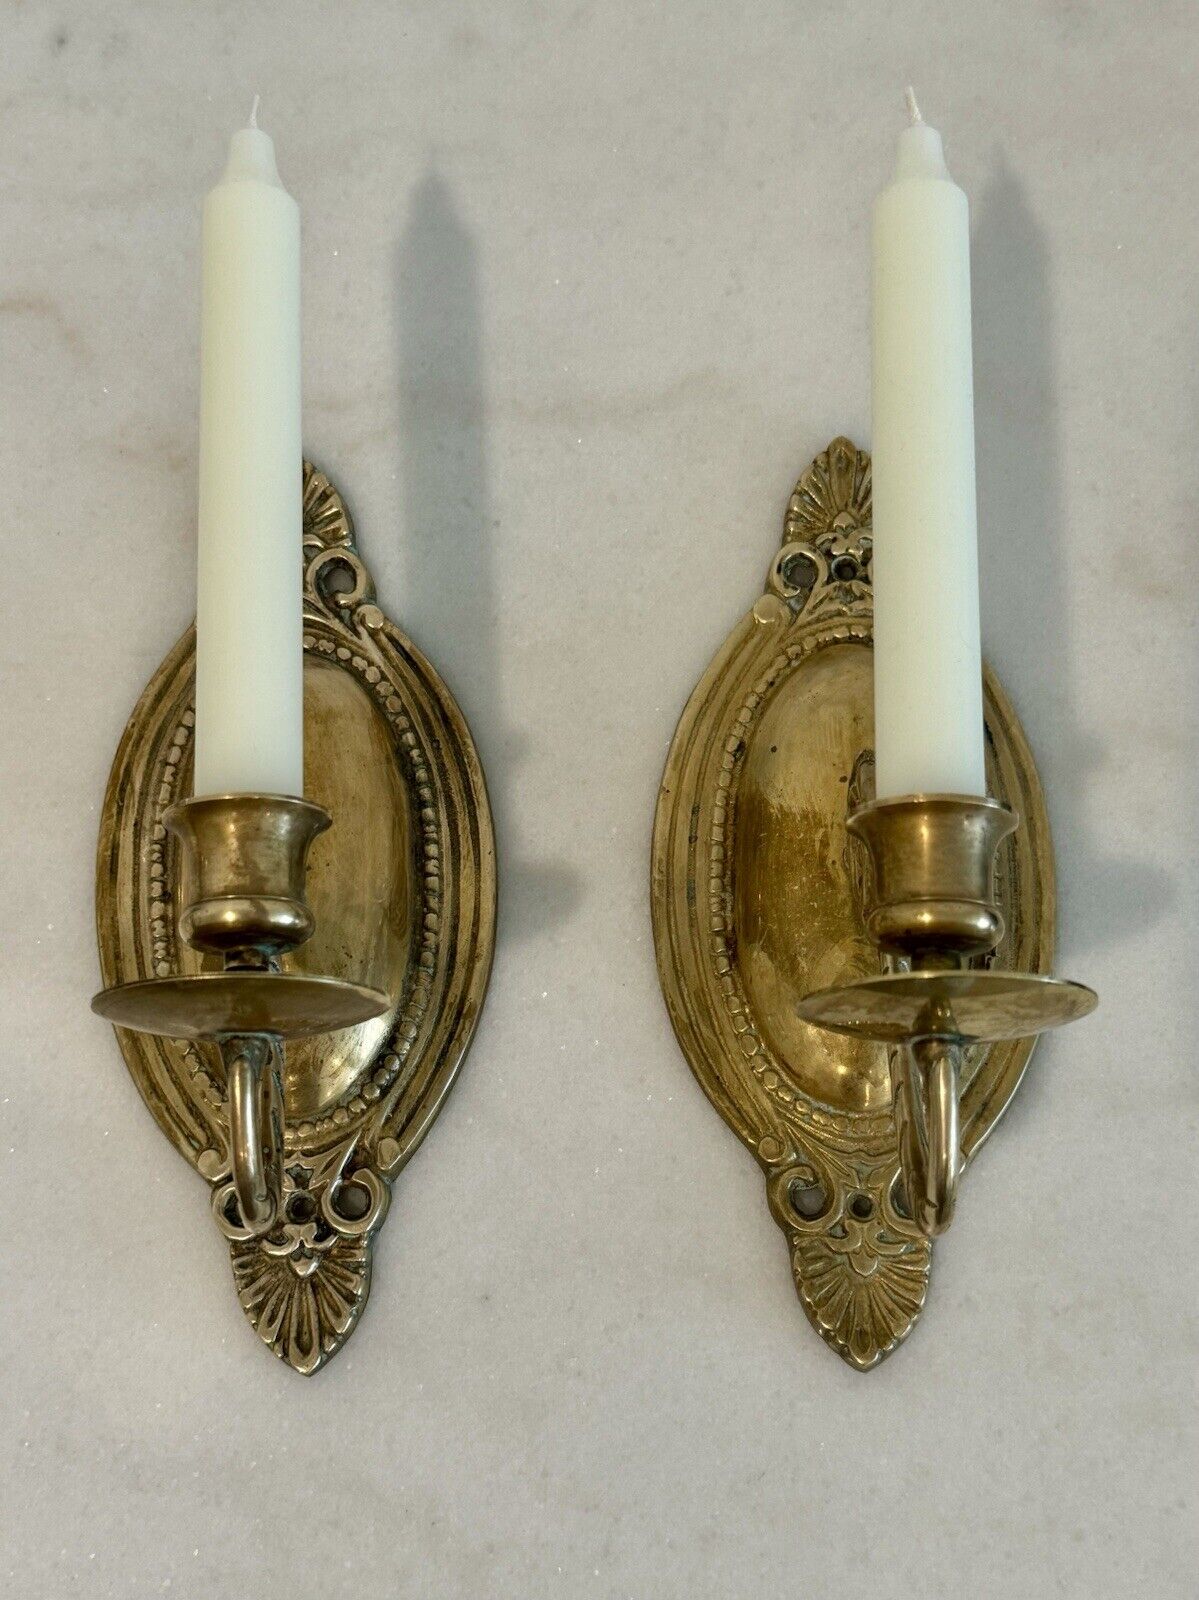 Vintage Pair Of Brass Candle Wall Sconces. 